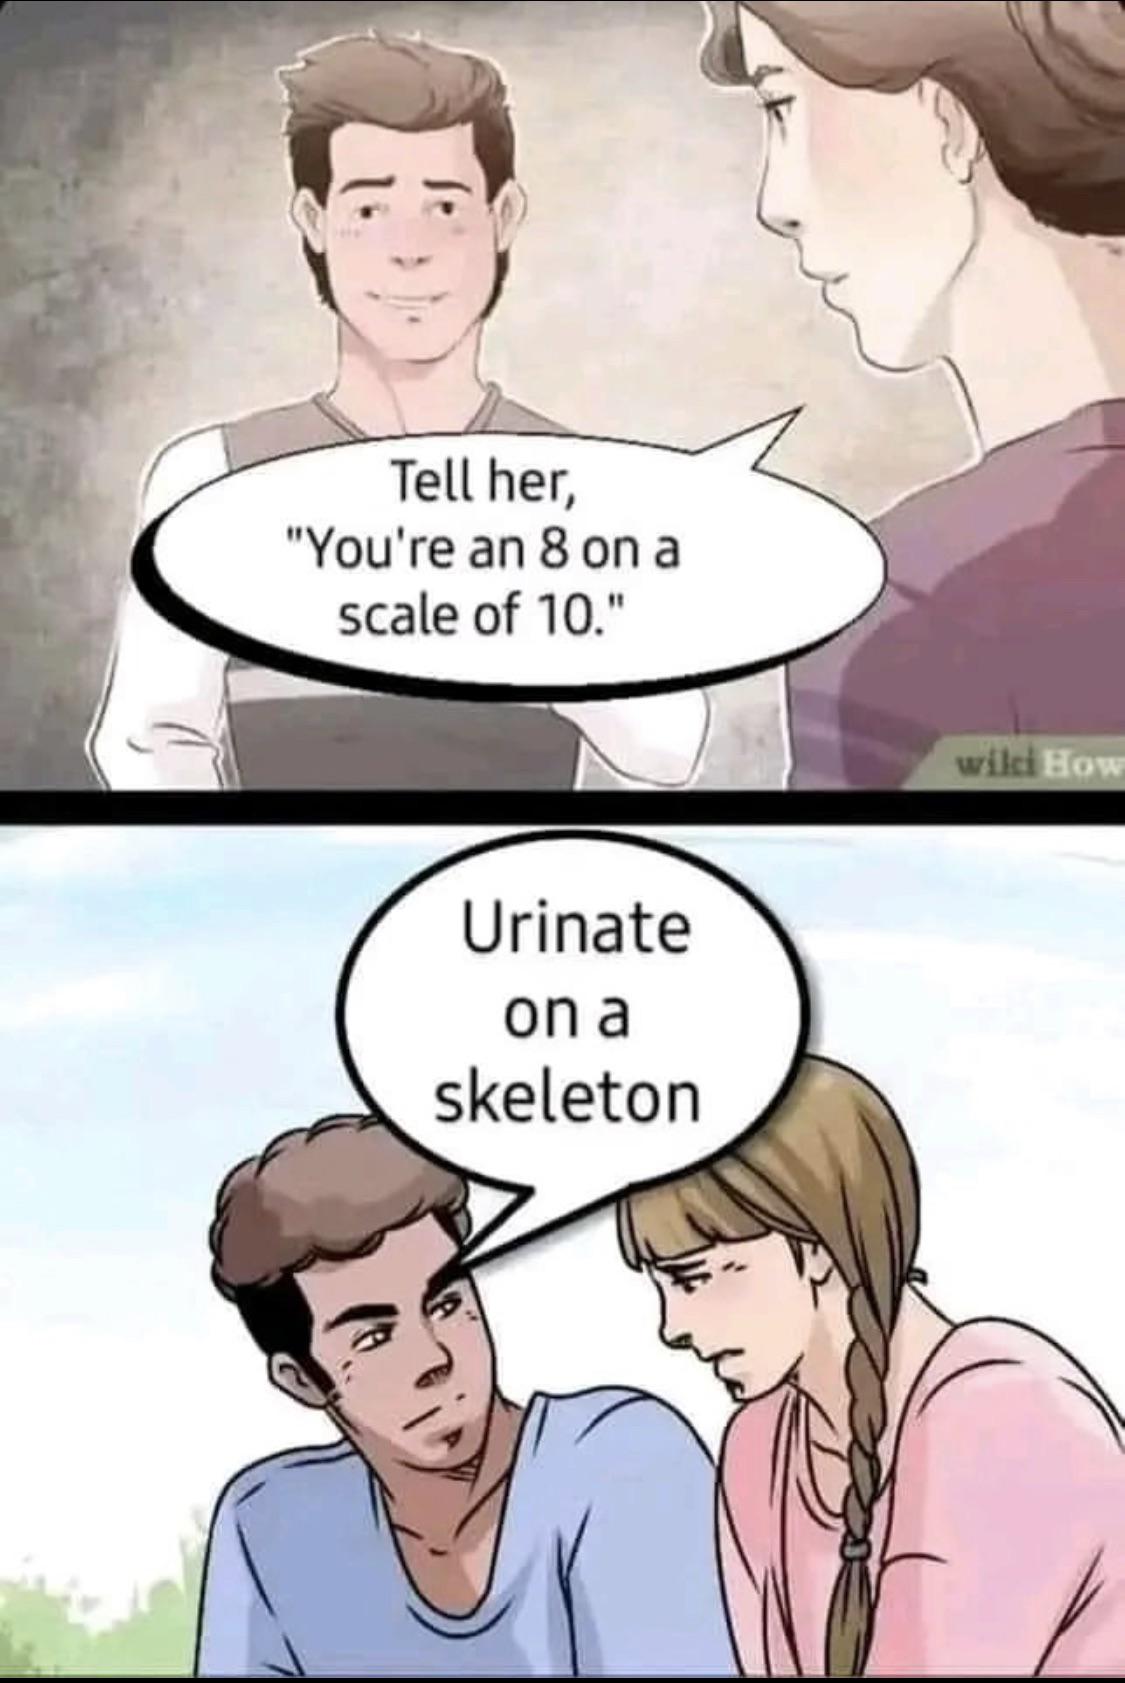 funny memes and pics - tell her you re an 8 - Tell her, "You're an 8 on a scale of 10." Urinate on a skeleton wiki How